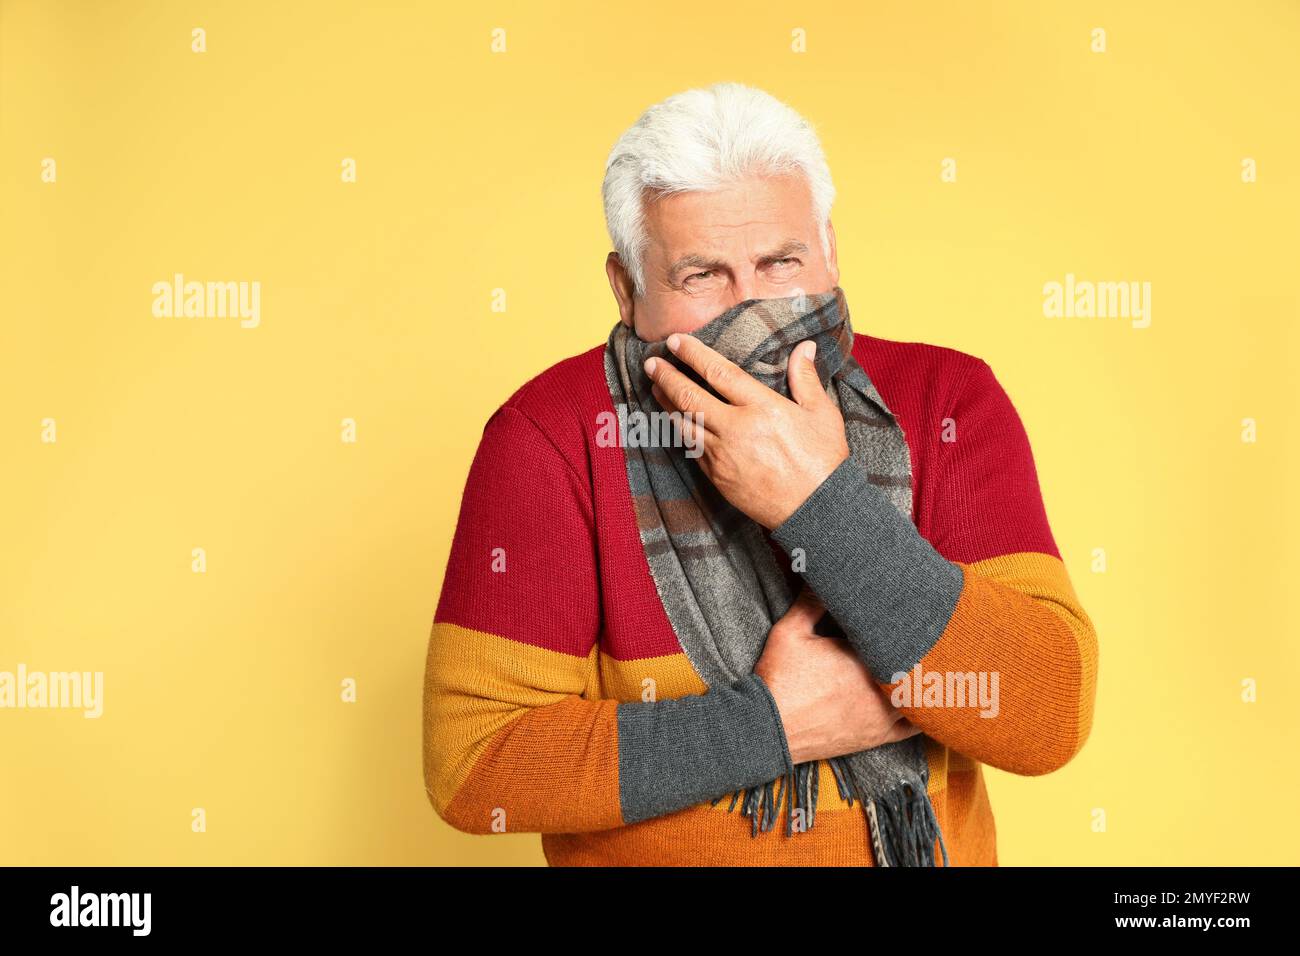 Senior man suppressing cough on yellow background. Cold symptoms Stock Photo